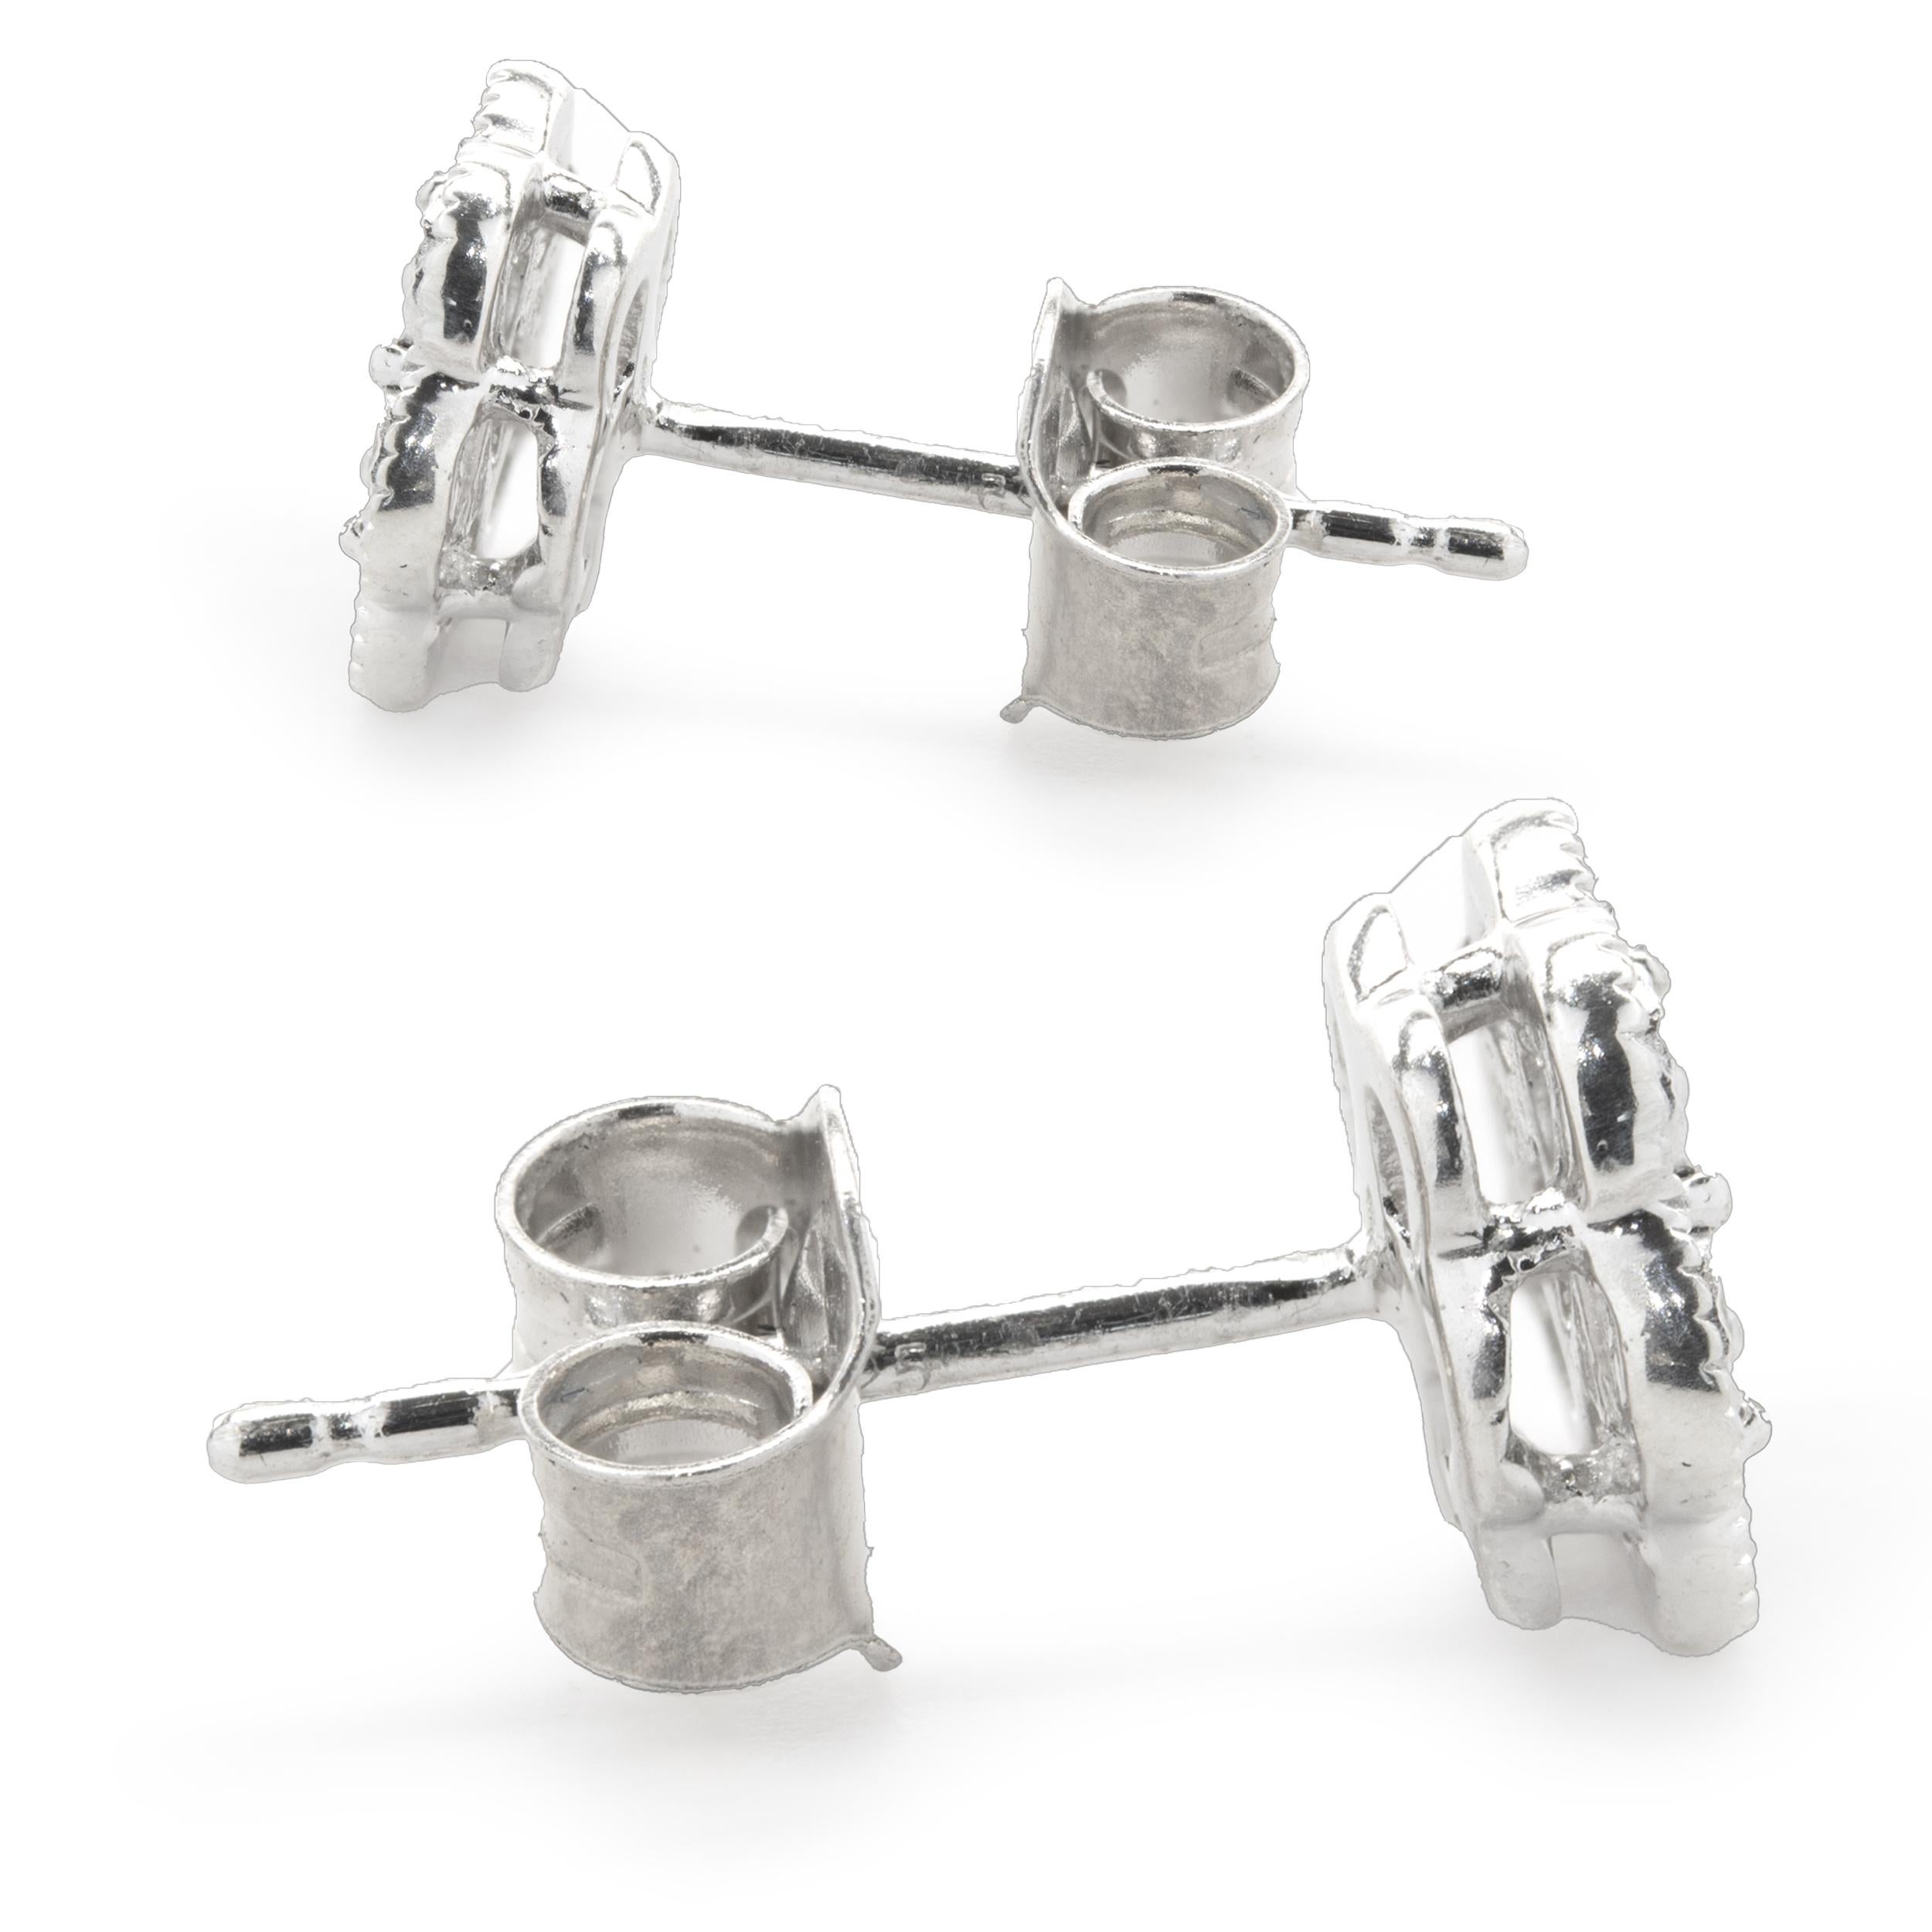 Designer: Effy
Material: sterling silver
Diamond: 14 round cut = .20cttw
Color: G
Clarity: I1
Weight: 1.26 grams
Dimensions: earrings measure 7.5mm wide